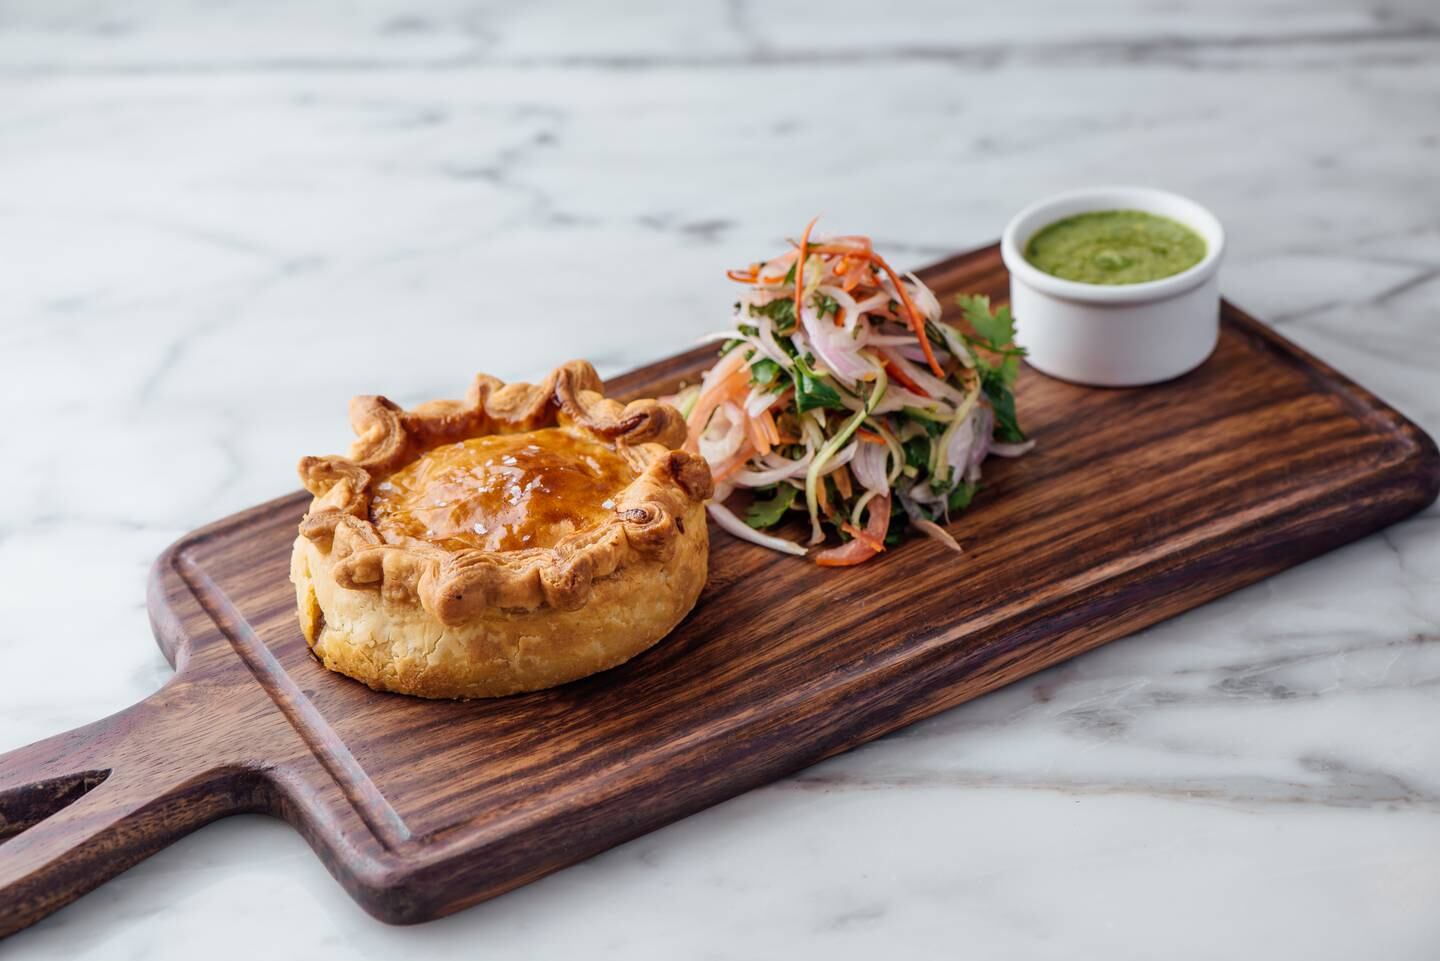 British pies and a traditional roast are part of Bread Street Kitchen's festive meals. Photo: Bread Street Kitchen